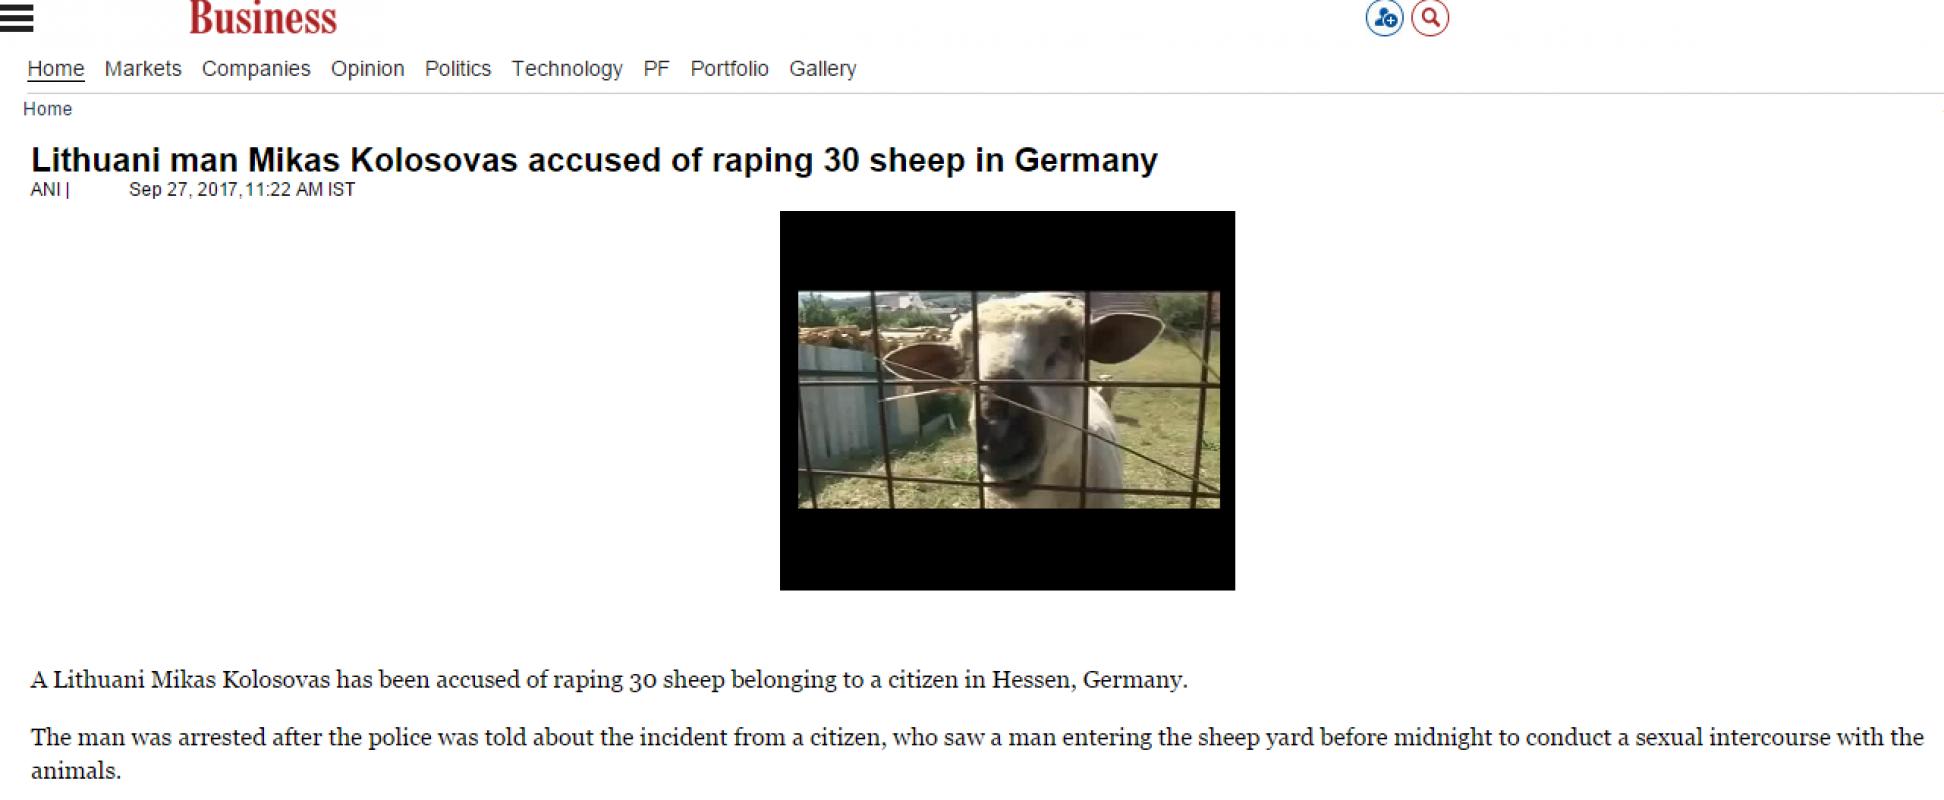 Mikas Kolosovas has been accused of raping 30 sheep belonging to a citizen in Hessen, Germany